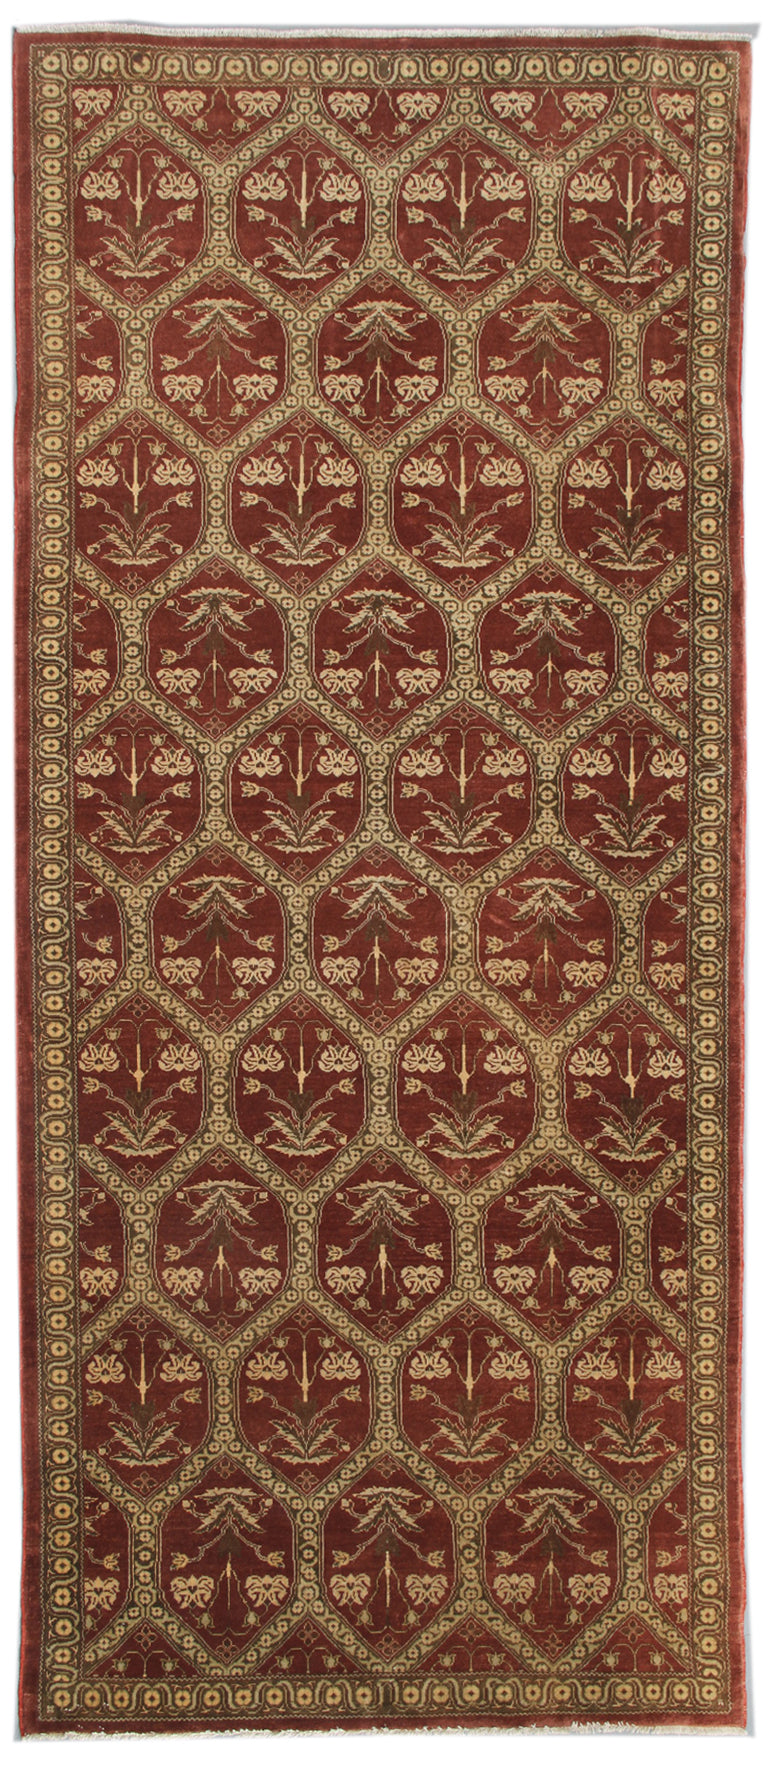 5'x11' Ariana Traditional wide Runner Rug